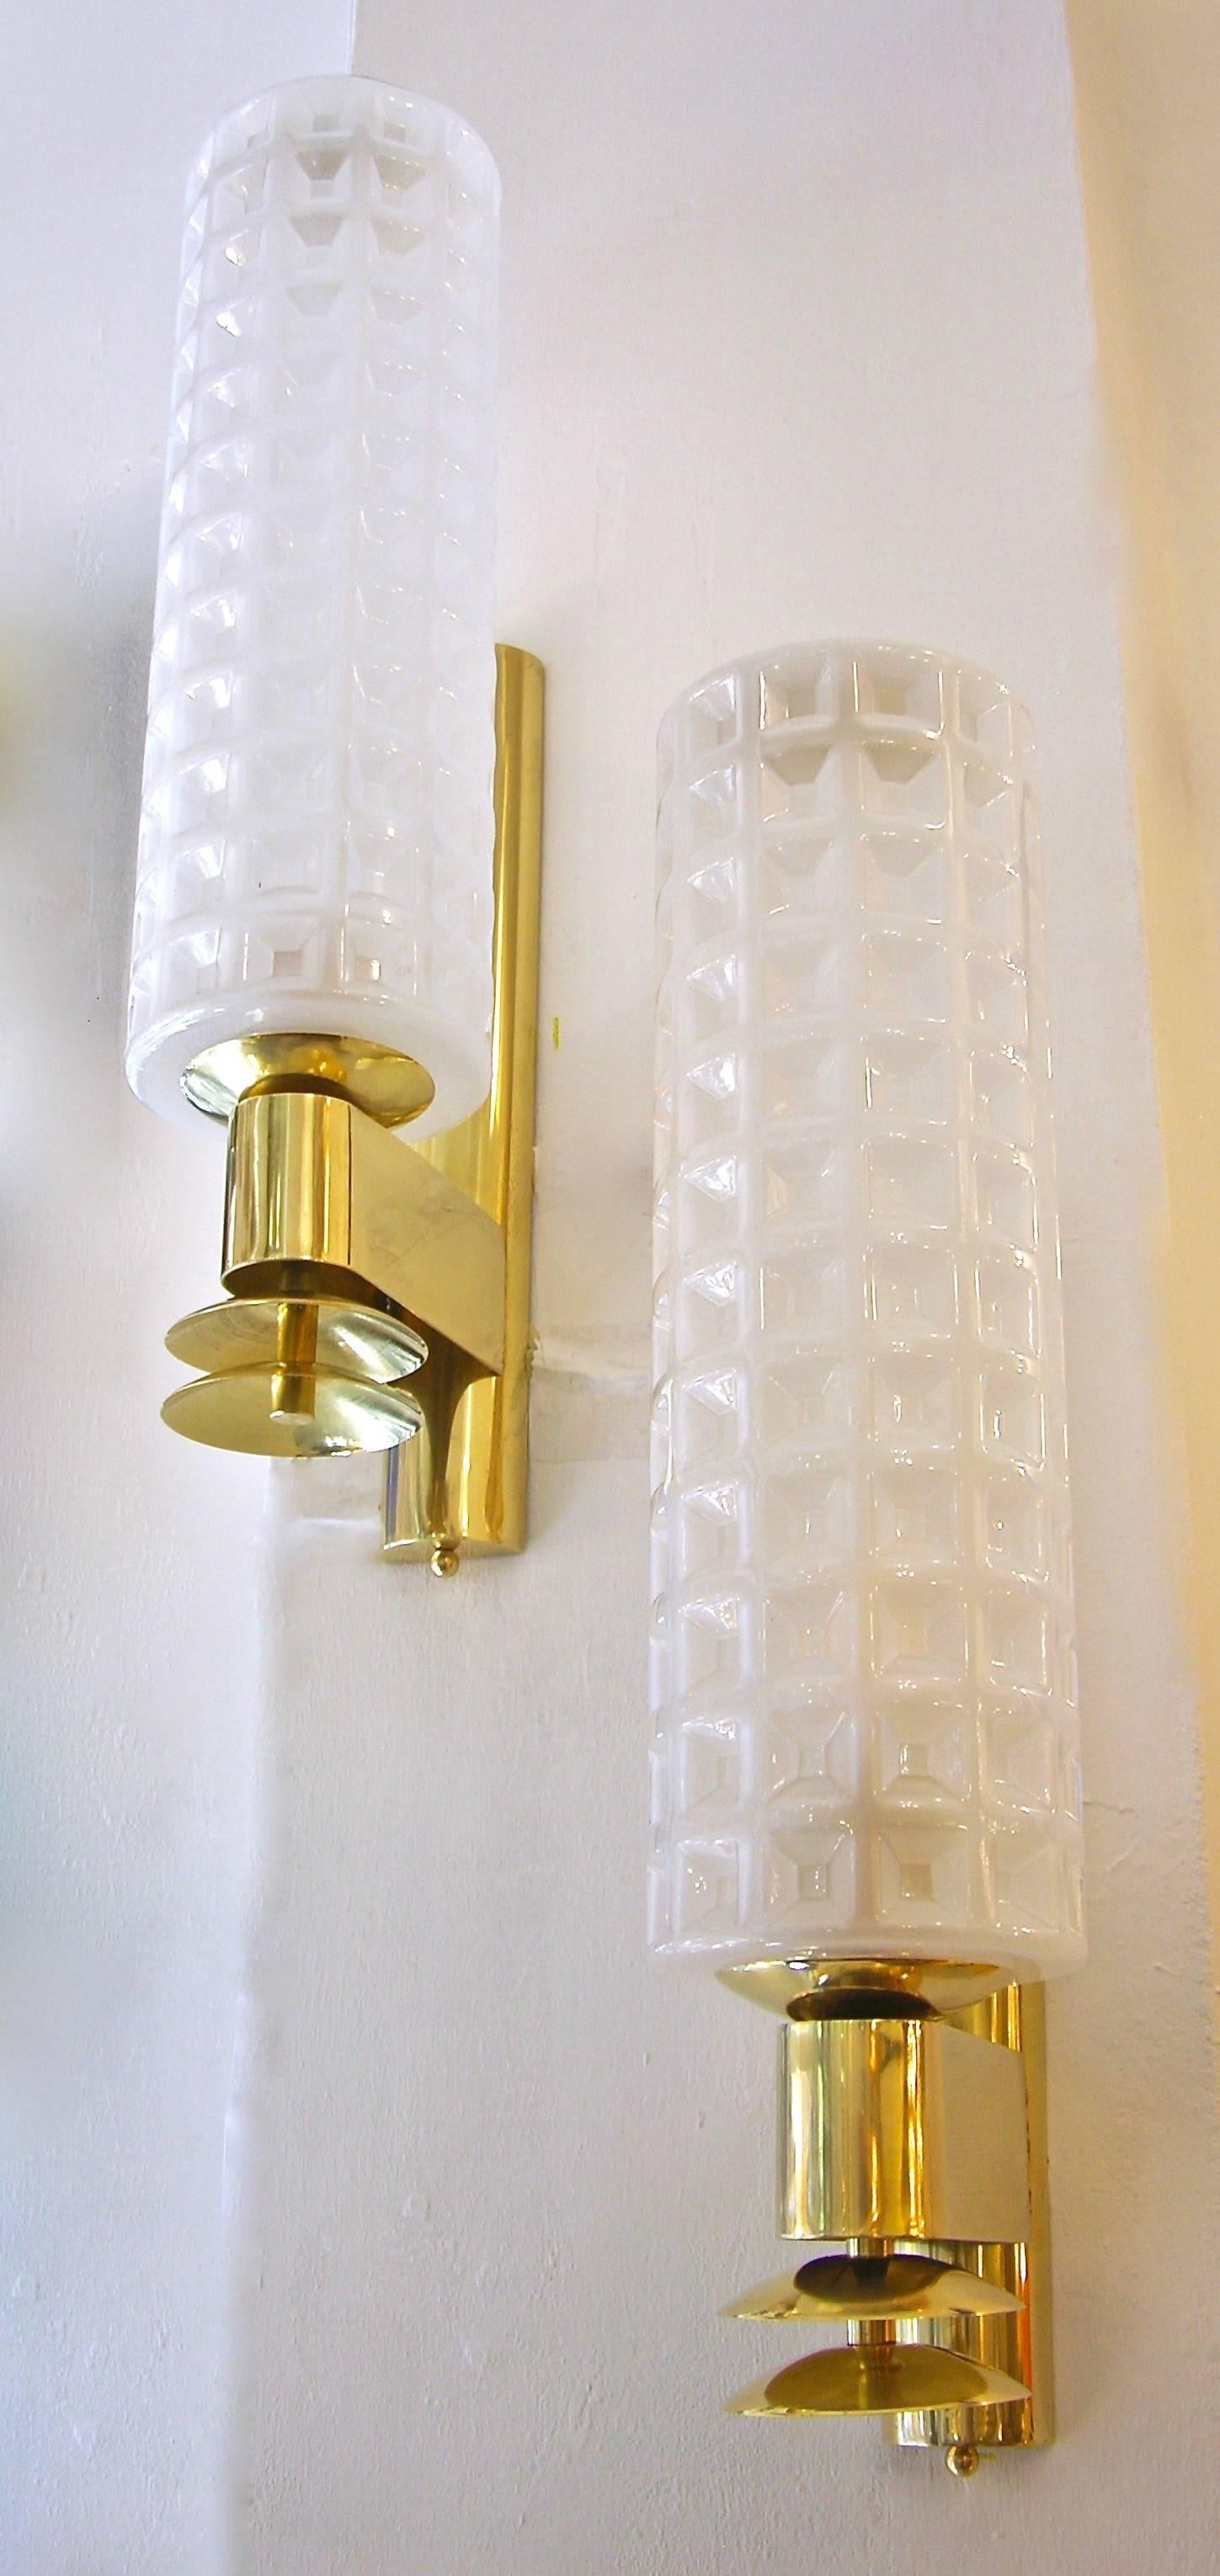 1980s Italian sophisticated cylindrical sconces of Art Deco Design, in milk white blown Murano glass, handcrafted with a textured geometric waffled pattern, on a handmade brass support. High quality of execution and gold brass finish with elegant